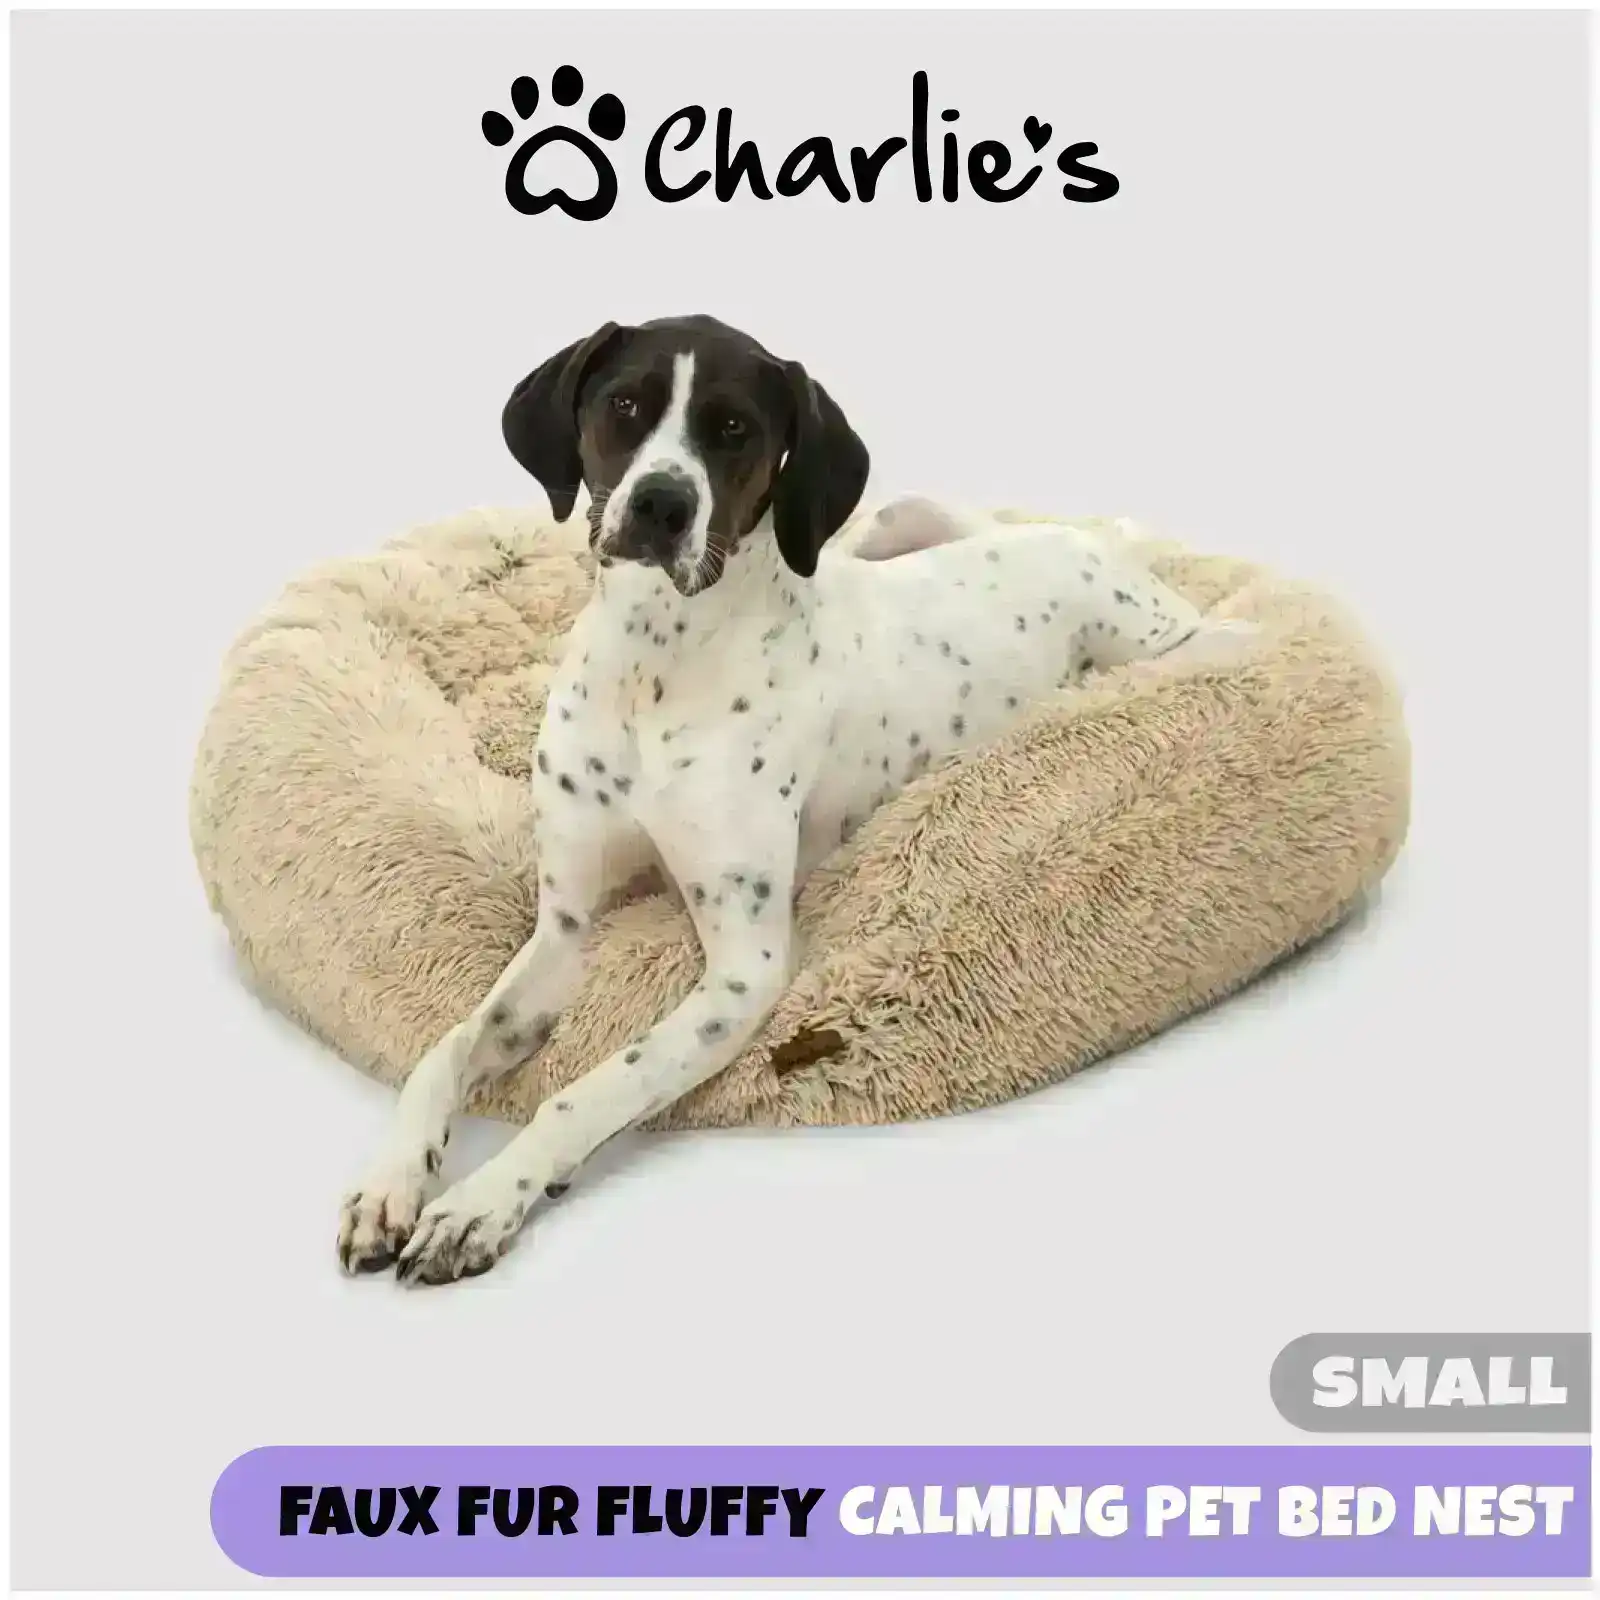 Charlie's Shaggy Faux Fur Donut Calming Pet Nest Bed Cream Chinchilla Small